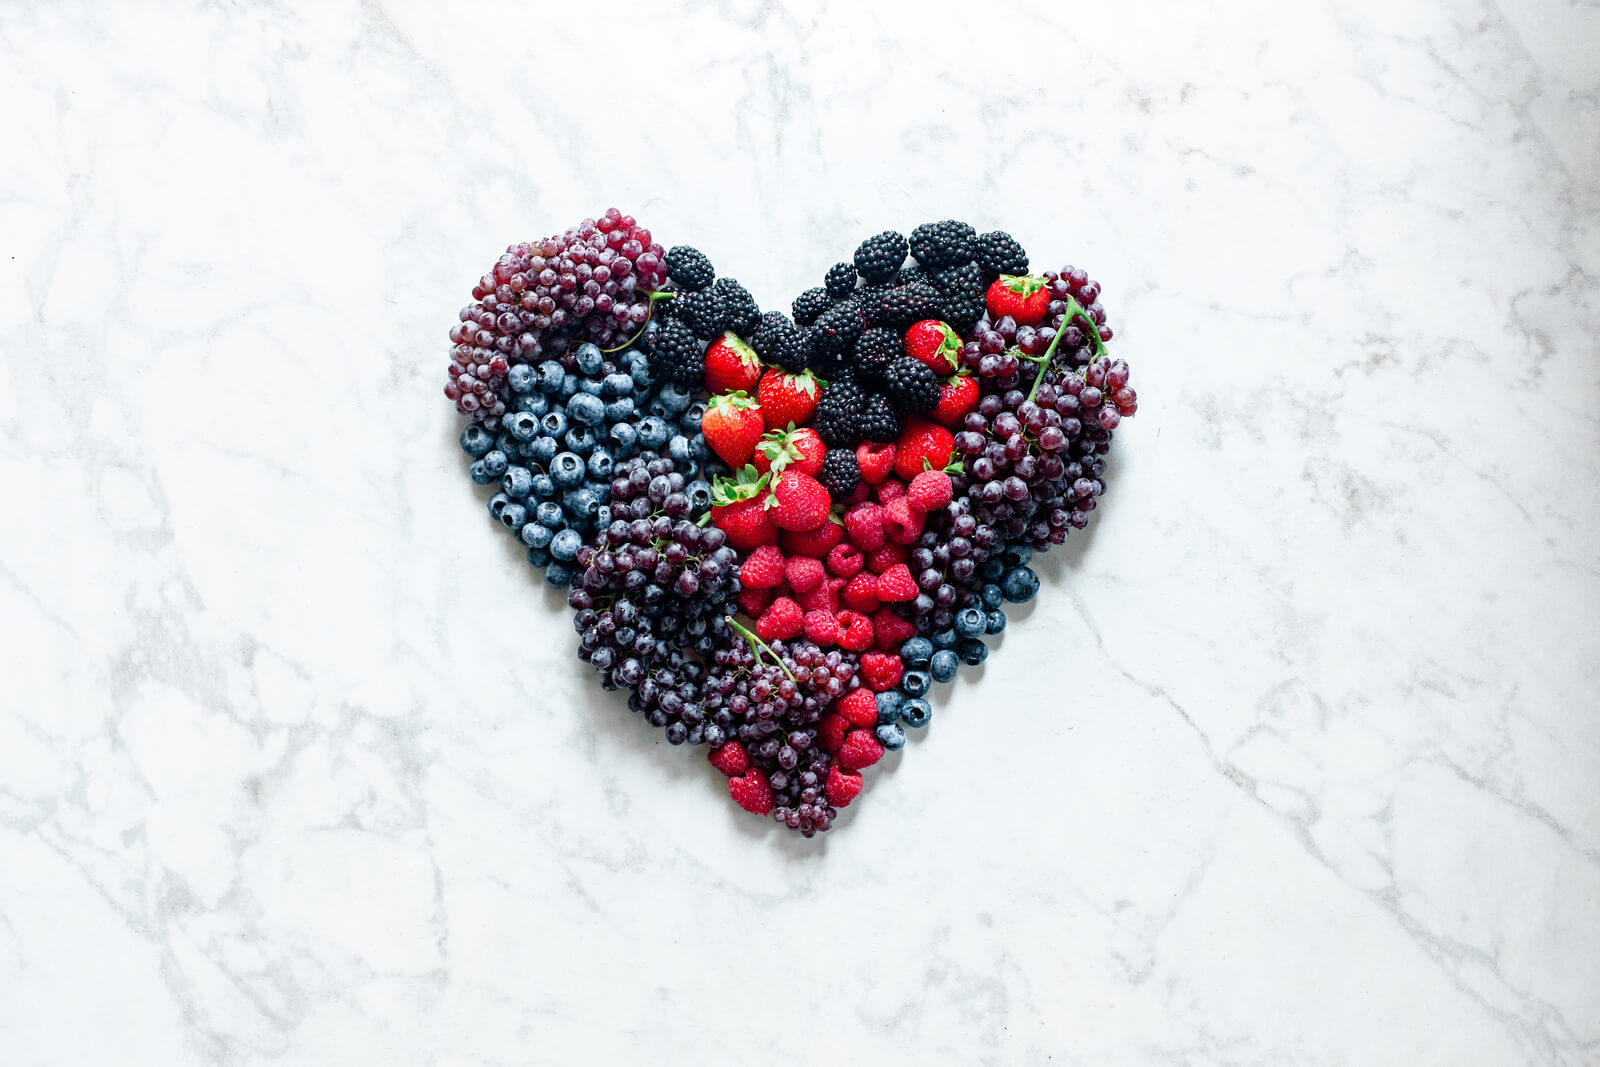 A antioxidant-rich heart-shaped arrangement of berries displayed on a smooth marble surface.